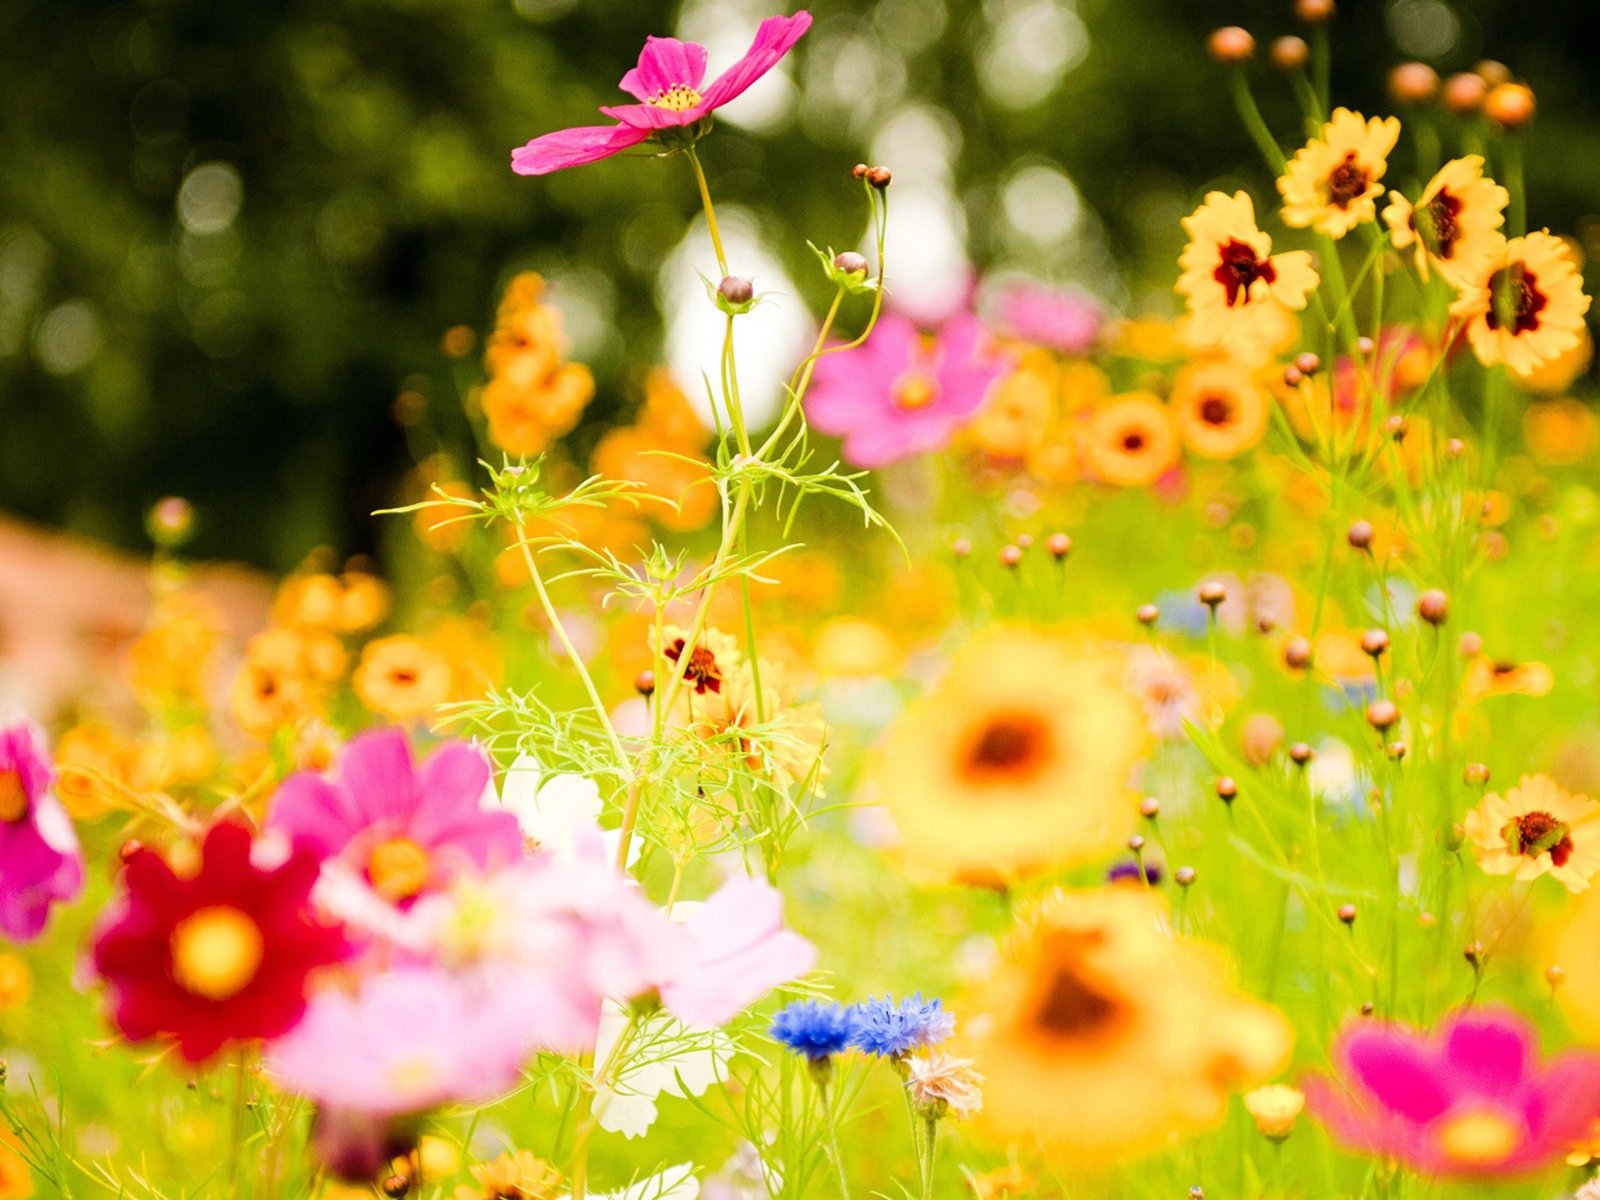 Fresh flowers and plants spring theme wallpapers #6 - 1600x1200